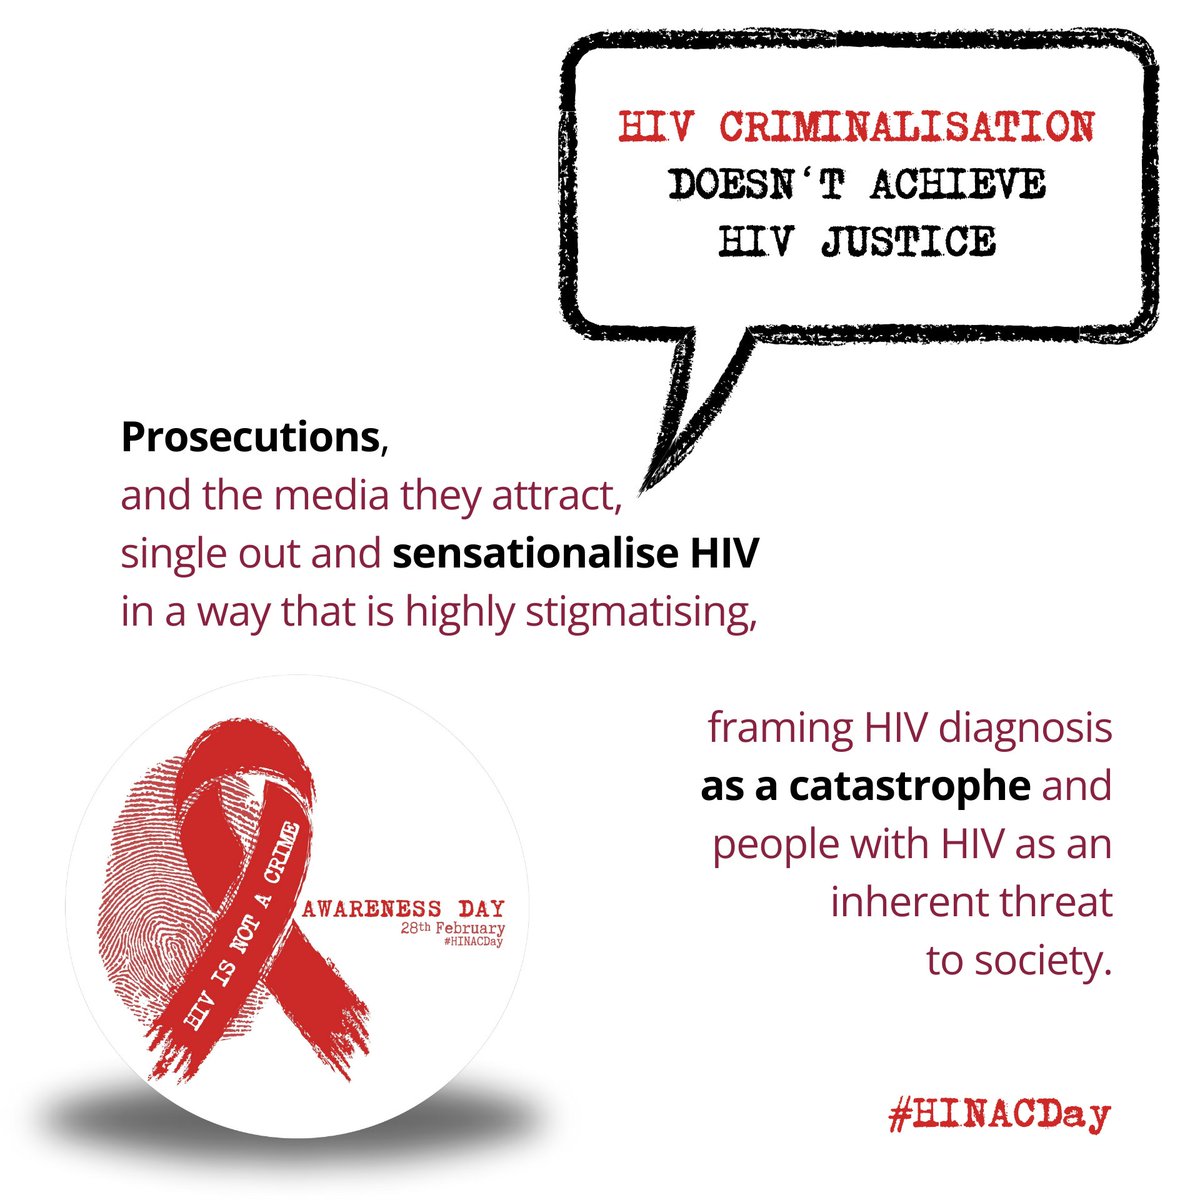 #HINACDay 28 FEB

Suggesting criminal charges as the primary or appropriate response to any perceived or potential #HIV exposure or allegations of non-intentional transmission is simply inappropriate. 

#HIVIsNotACrime #NotACriminal